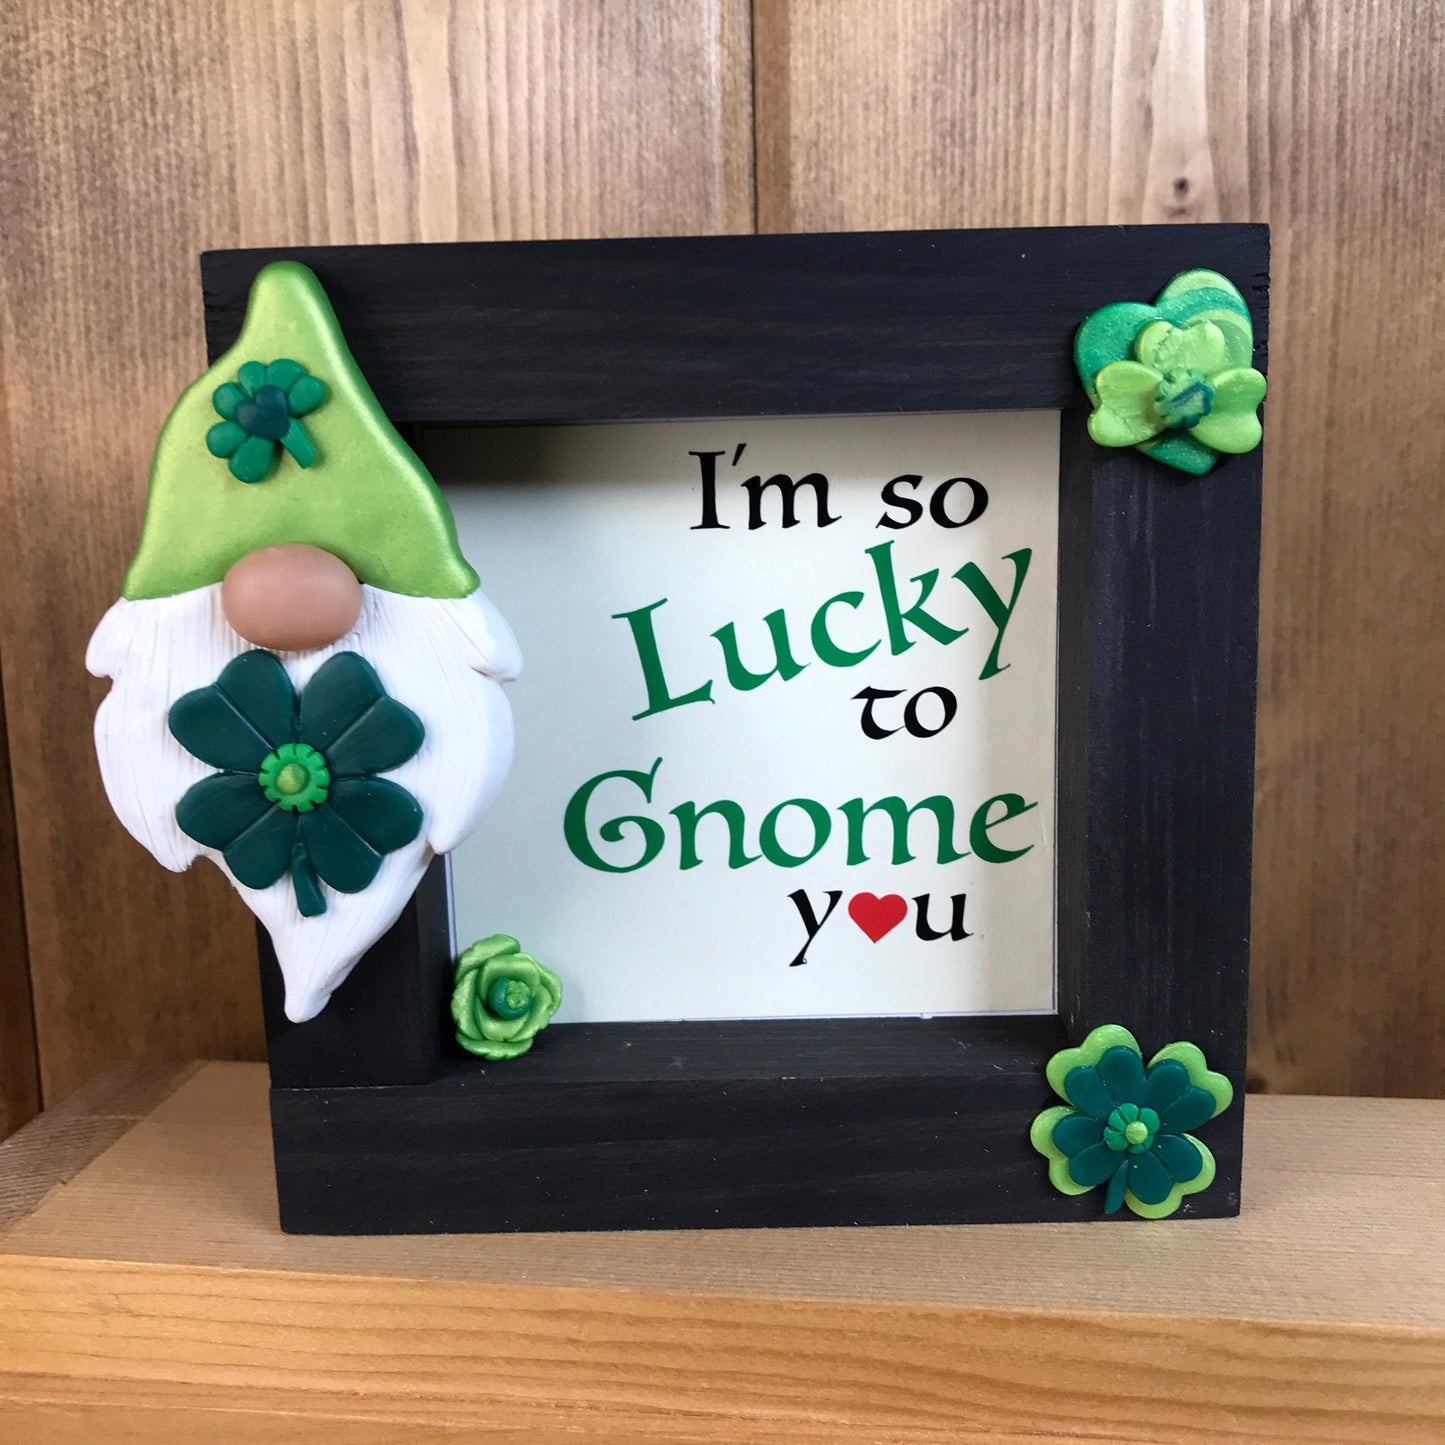 St. Patrick’s Day Irish Gnome, Lucky 4 Leaf Clover Mini Tier Tray Frame, Polymer Clay Painted Gnome and Clay Shamrocks St Paddy’s Home Decor